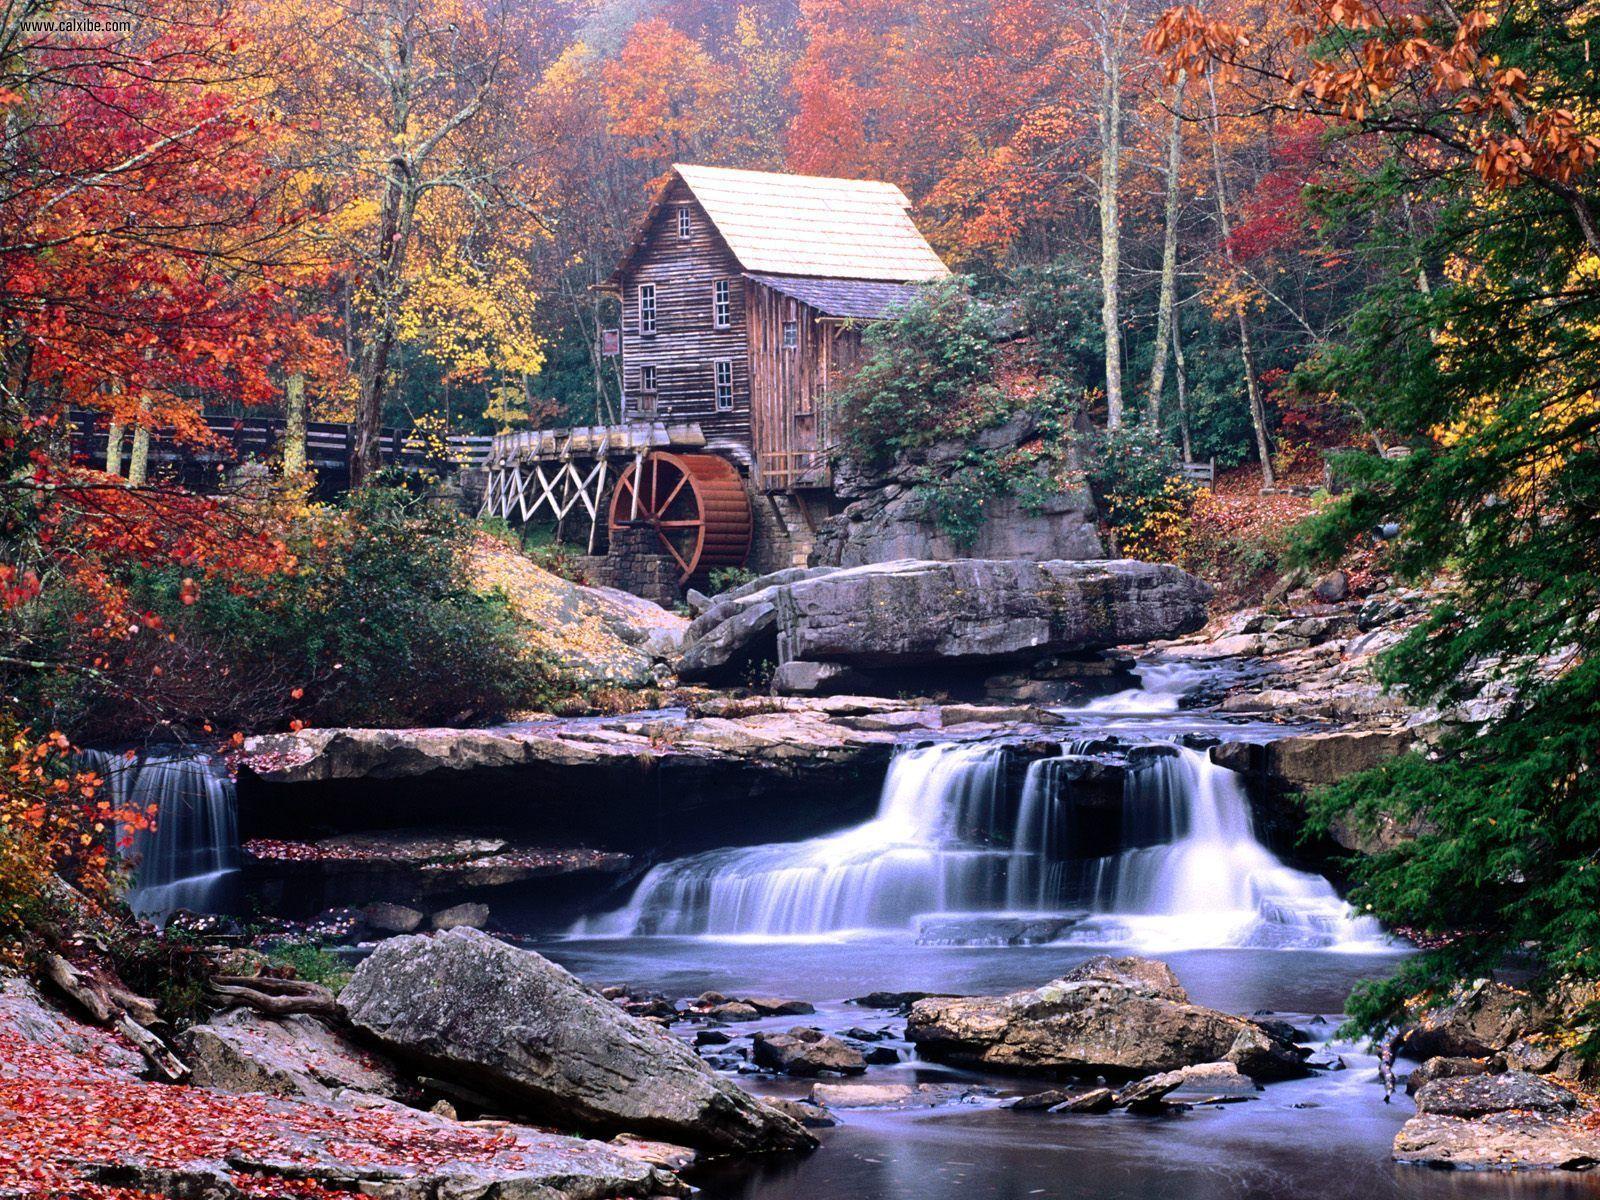 Known places: Glade Creek Grist Mill Babcock State Park West